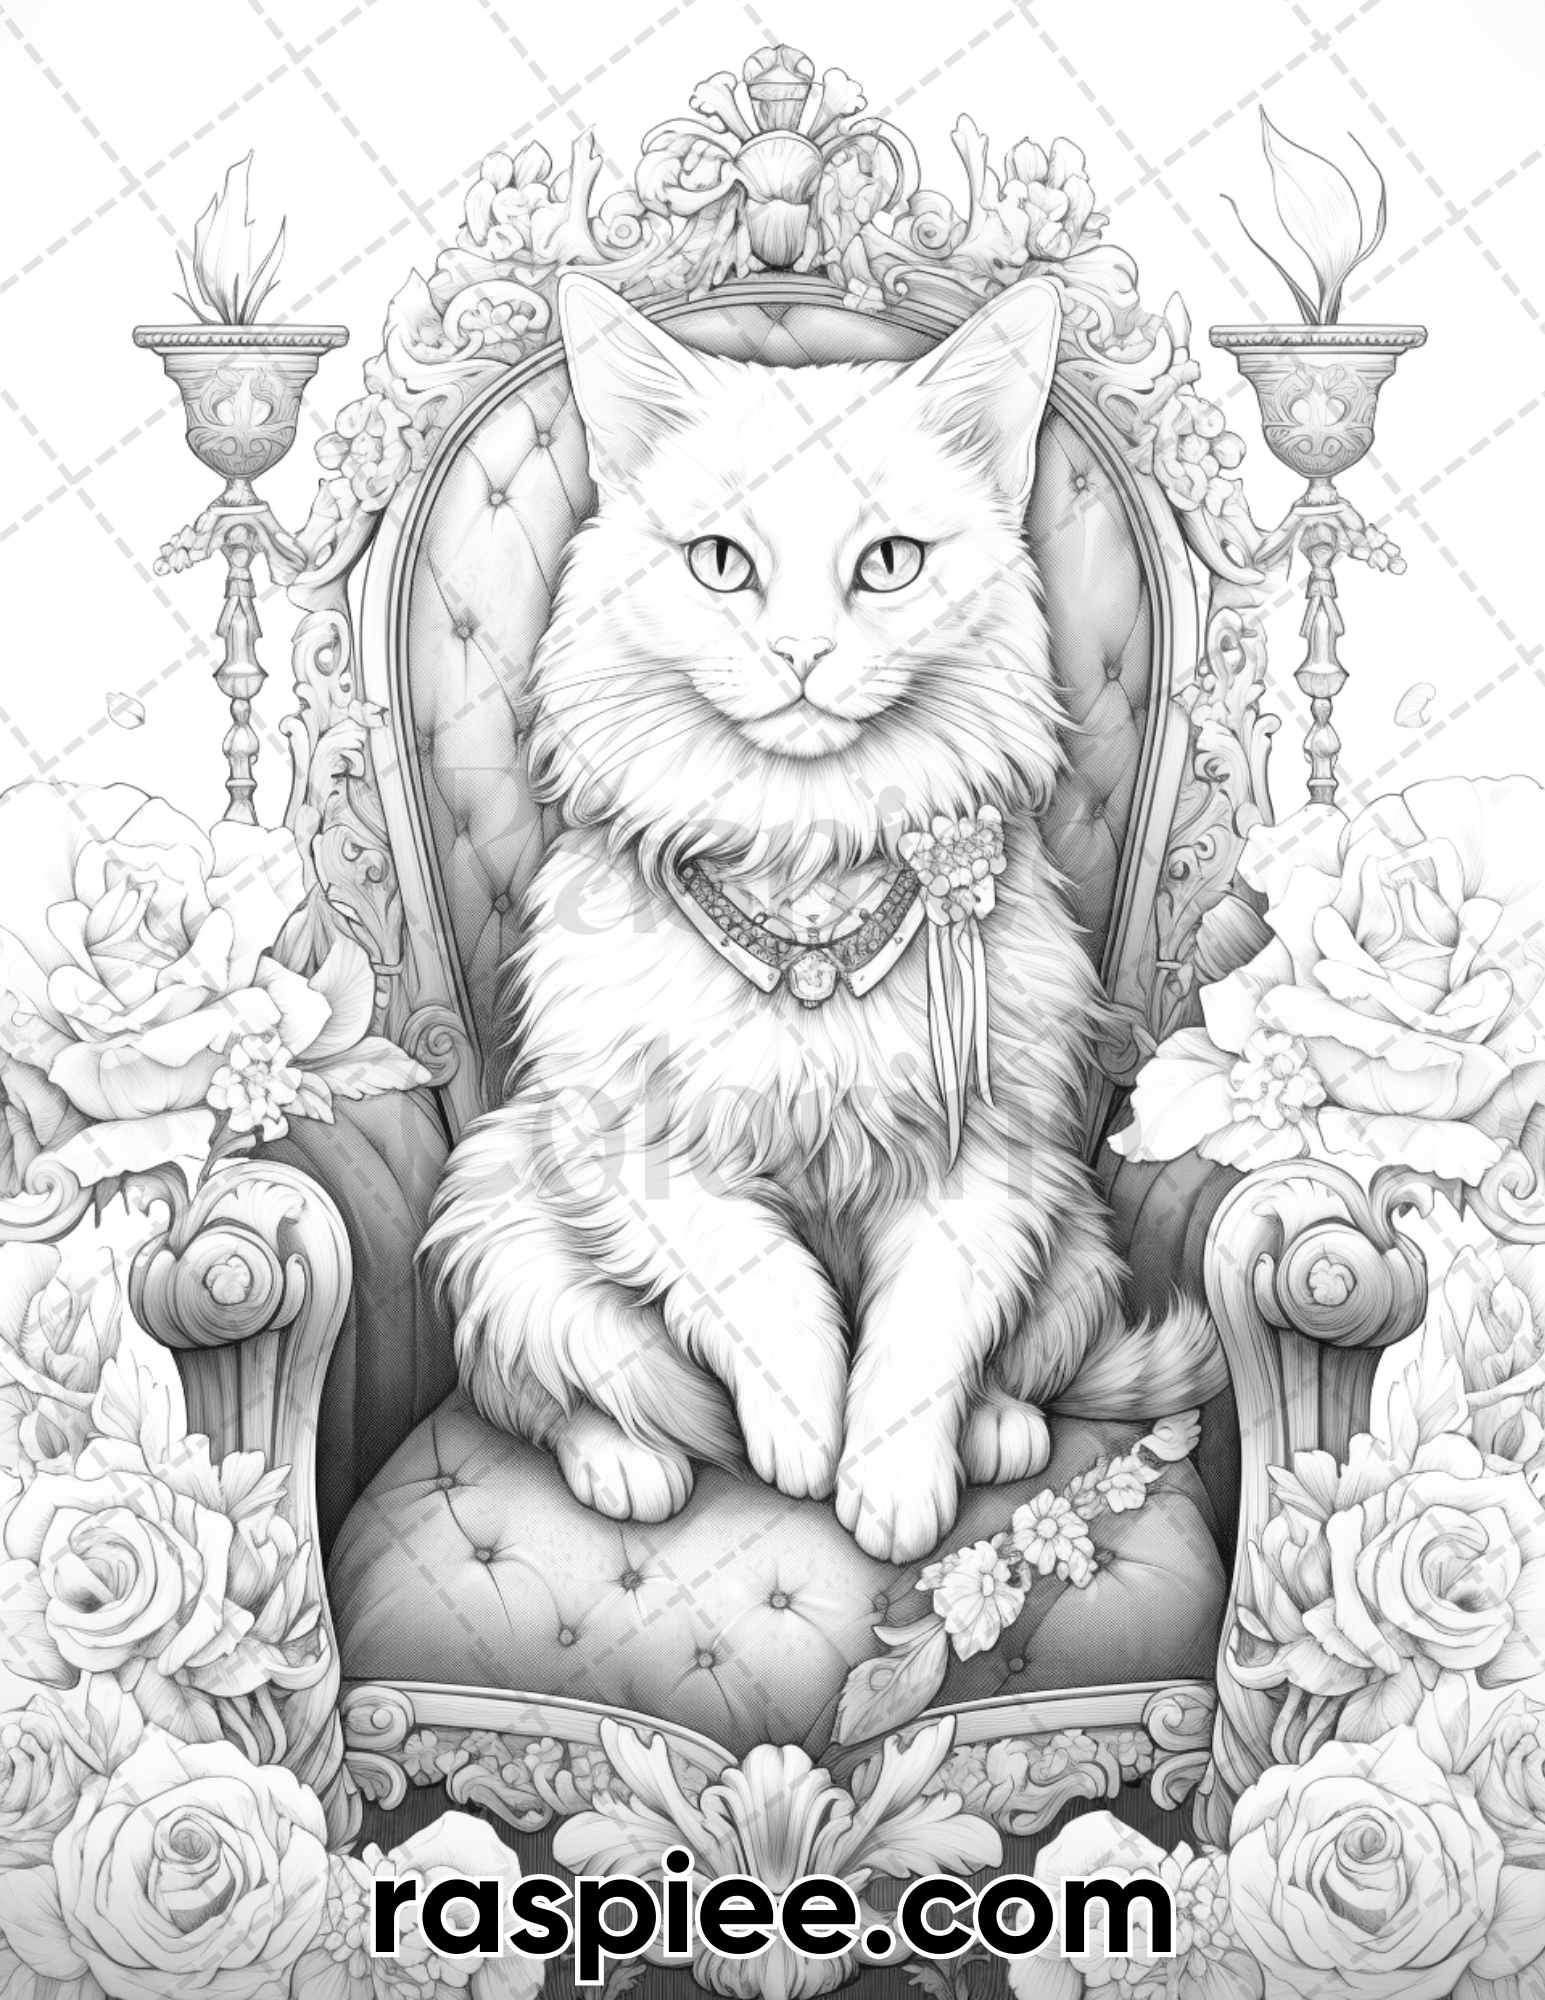 Cats Coloring Book: Realistic Adult Coloring Book, Advanced Cat Coloring  Book for Adults (Realistic Animals Coloring Book #3)